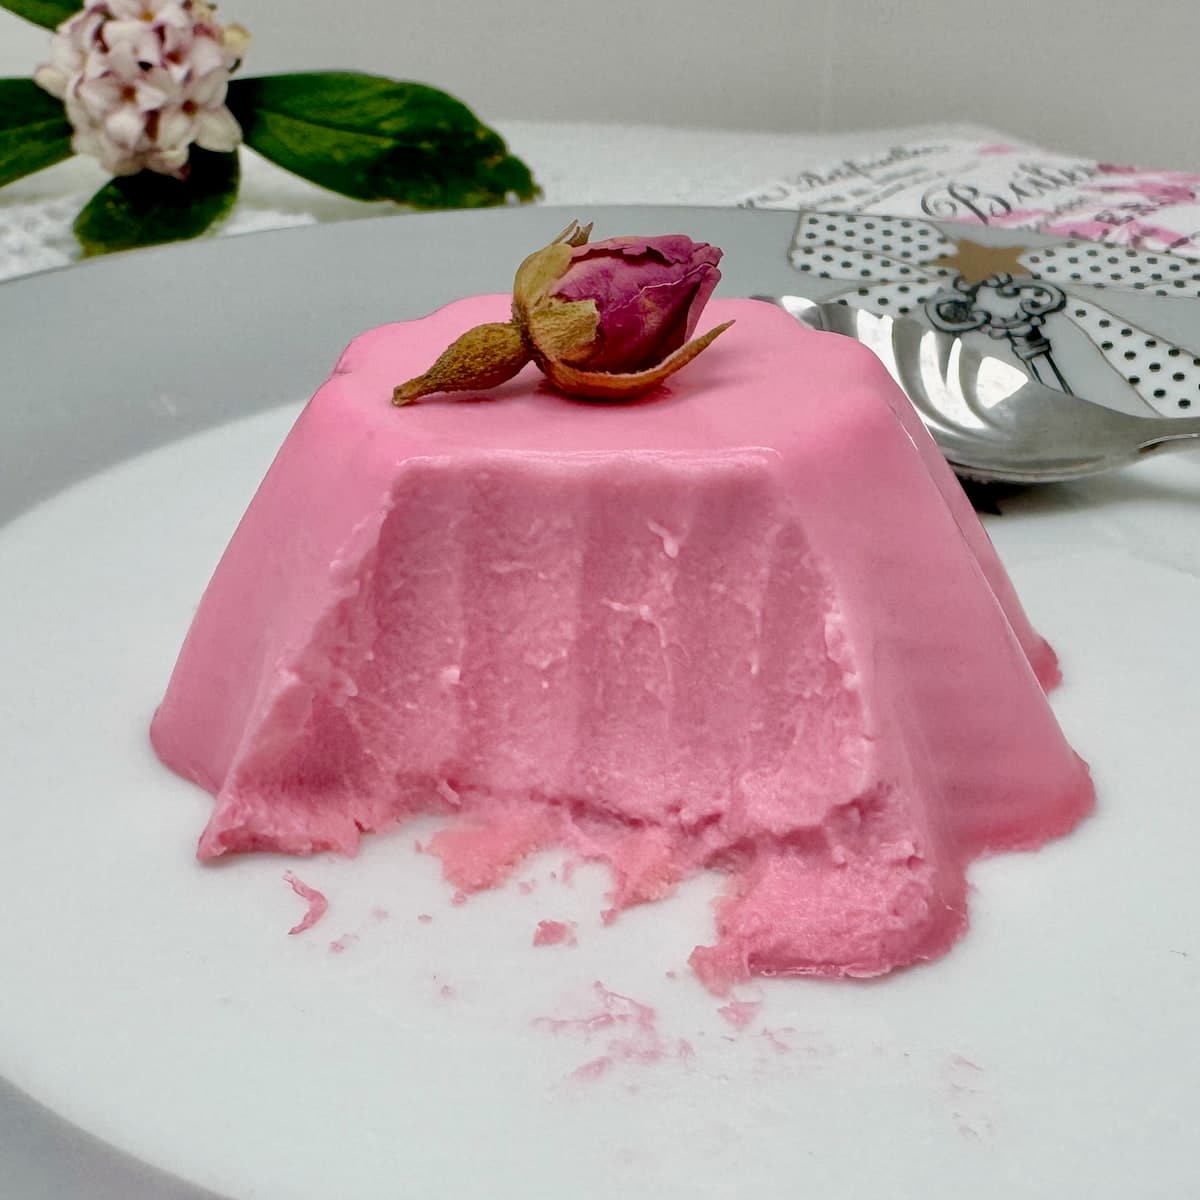 pink panna cotta dessert made with white chocolate and rose